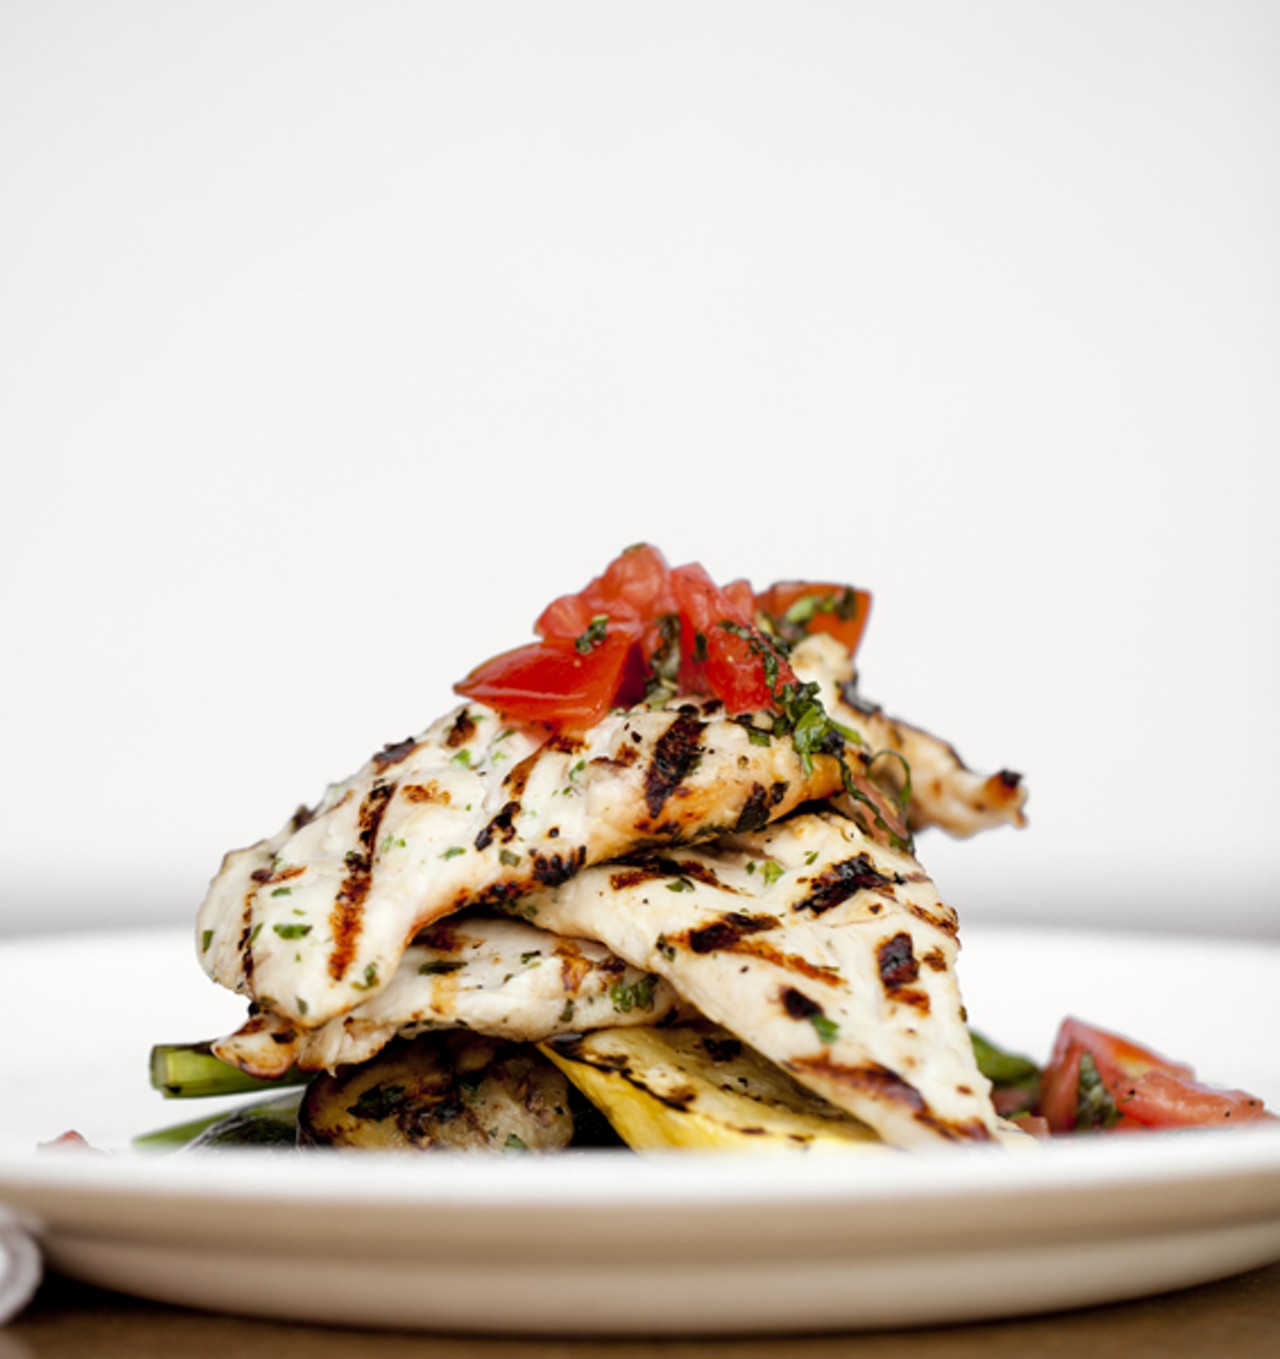 Chicken Griglia - Amish, cage free, grilled marinated chicken served with grilled vegetables